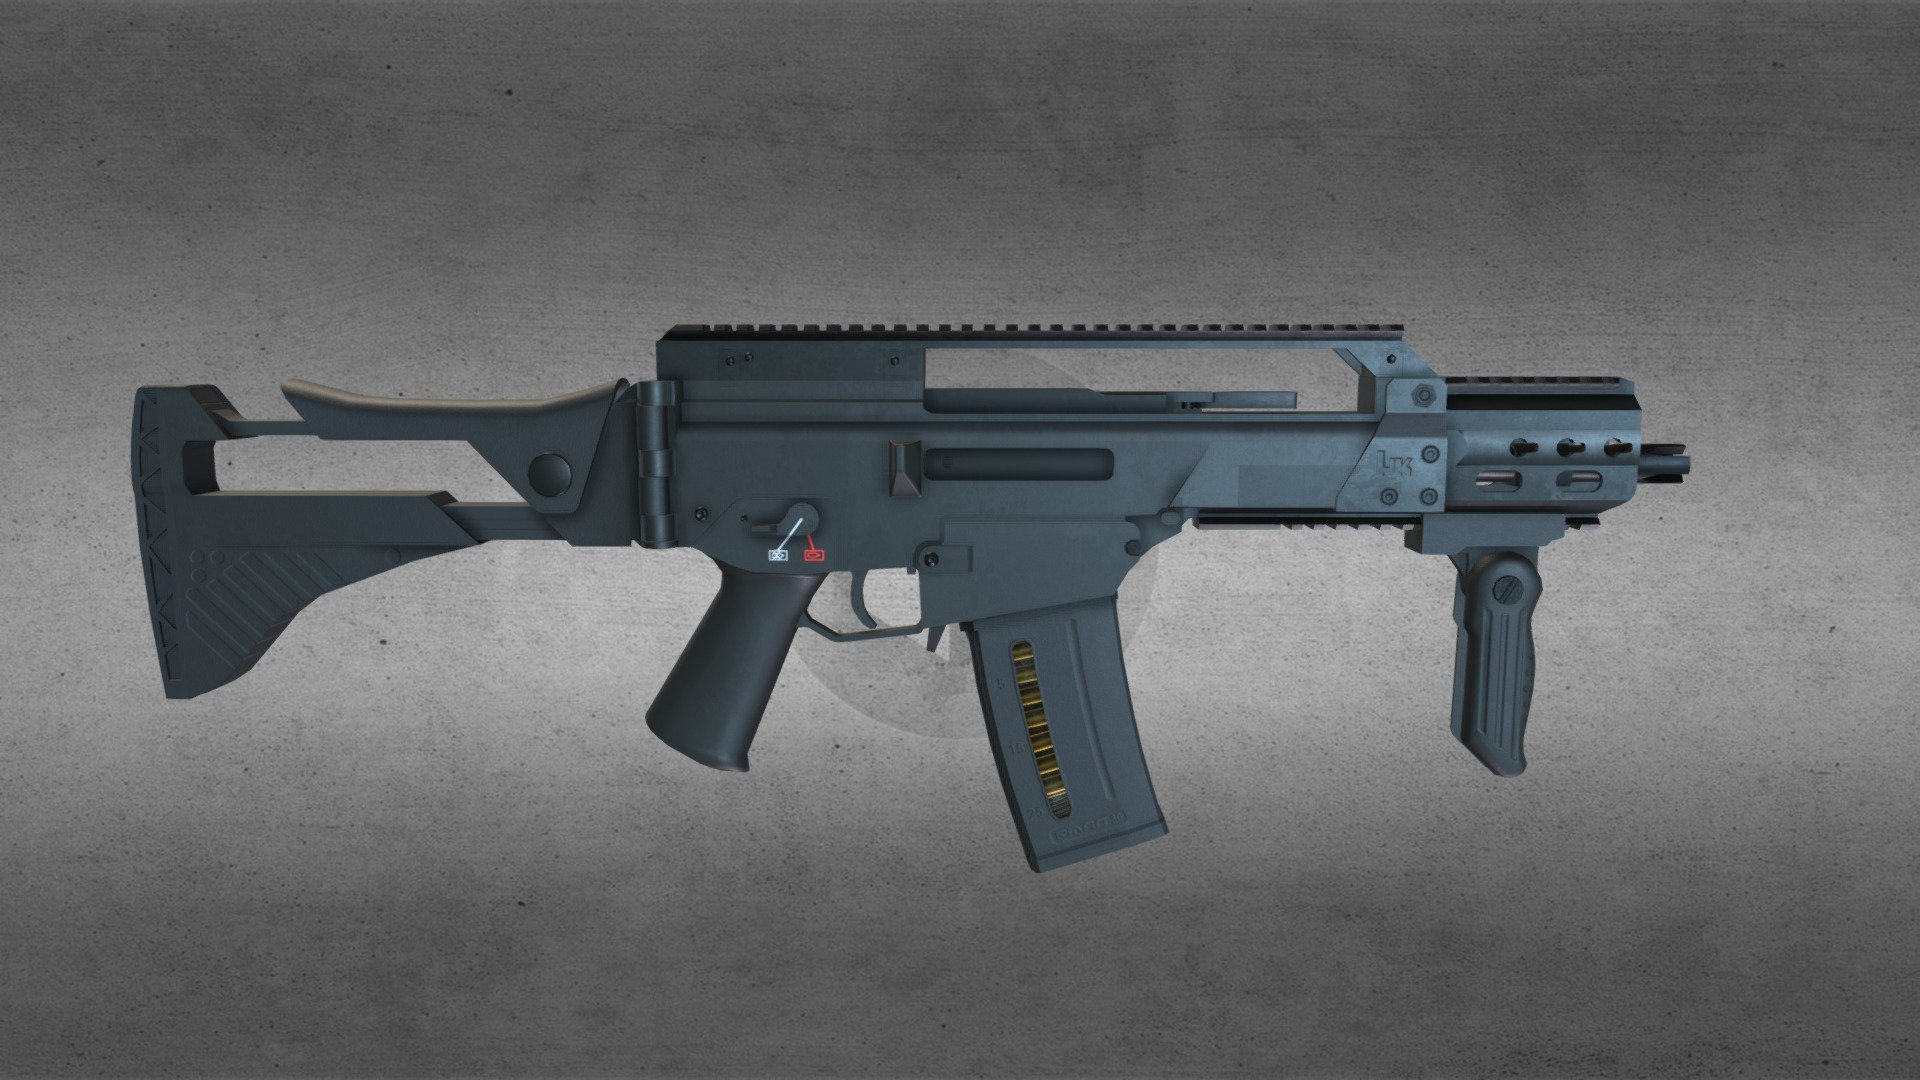 H&amp;K G36C rifle, with custom HK rail, grip and PMAG.

3 texture sets, one 4k for the rifle, one 1k for the grip and one 1k for the magazine 3d model